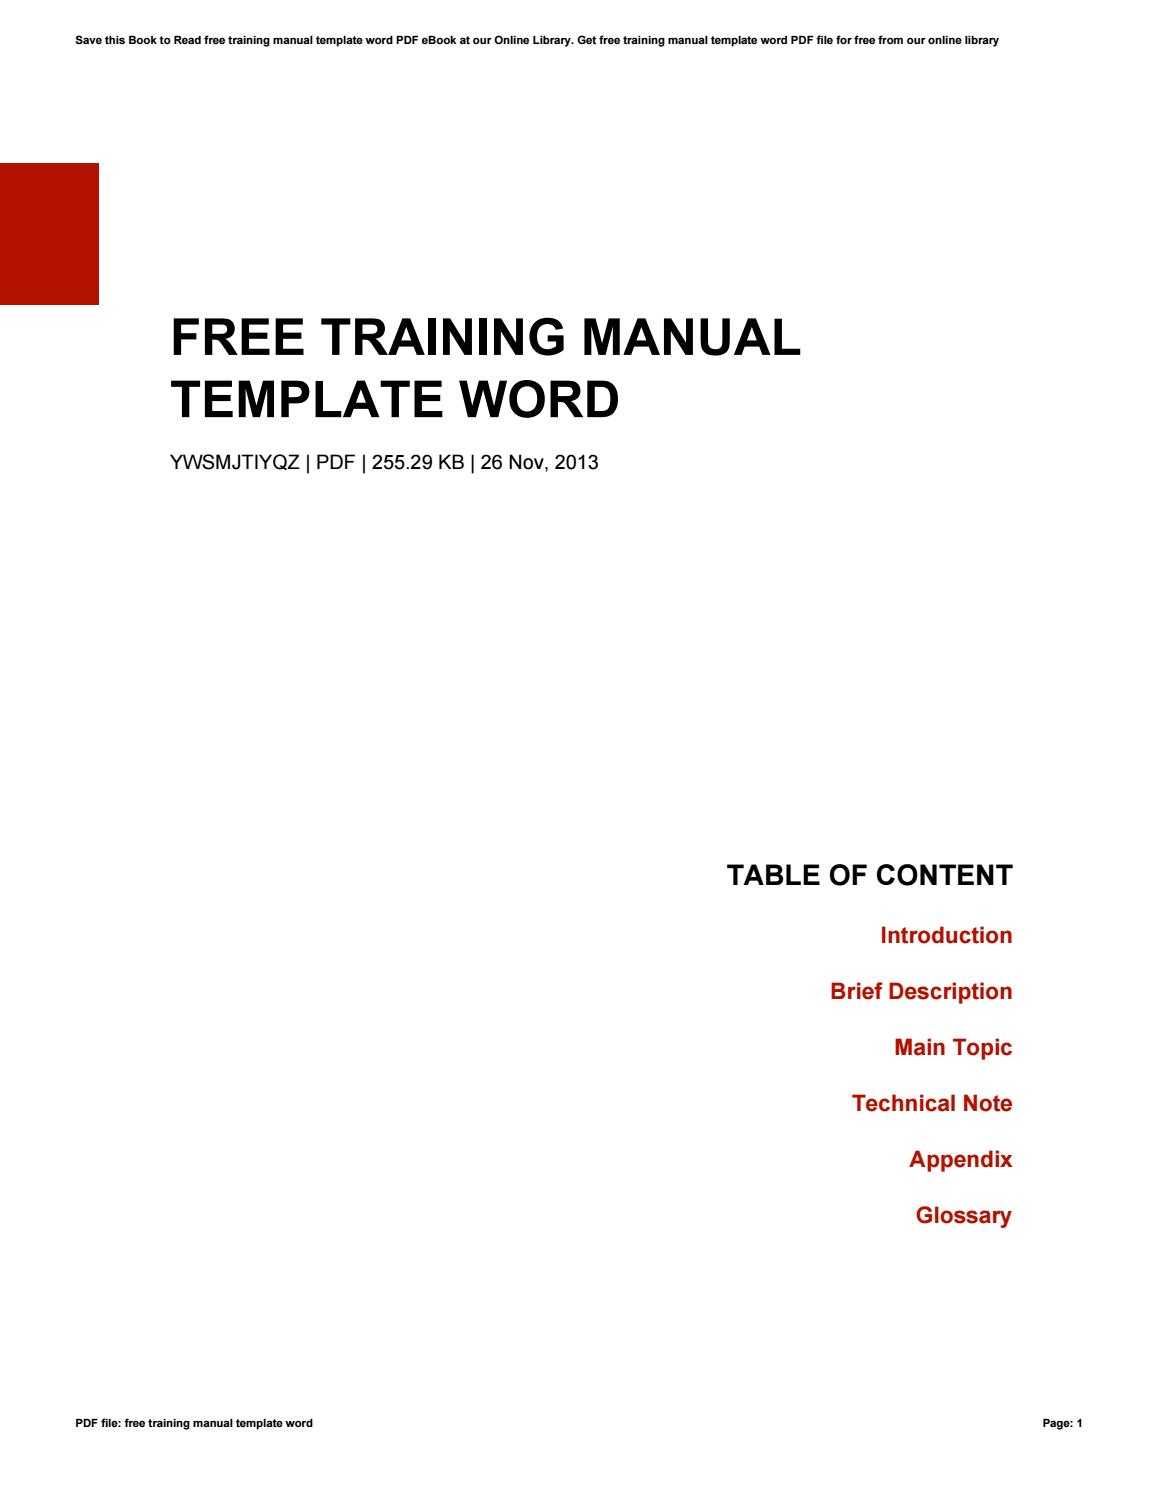 003 Training Manual Template Word Ideas Page 1 Fascinating Within Training Documentation Template Word